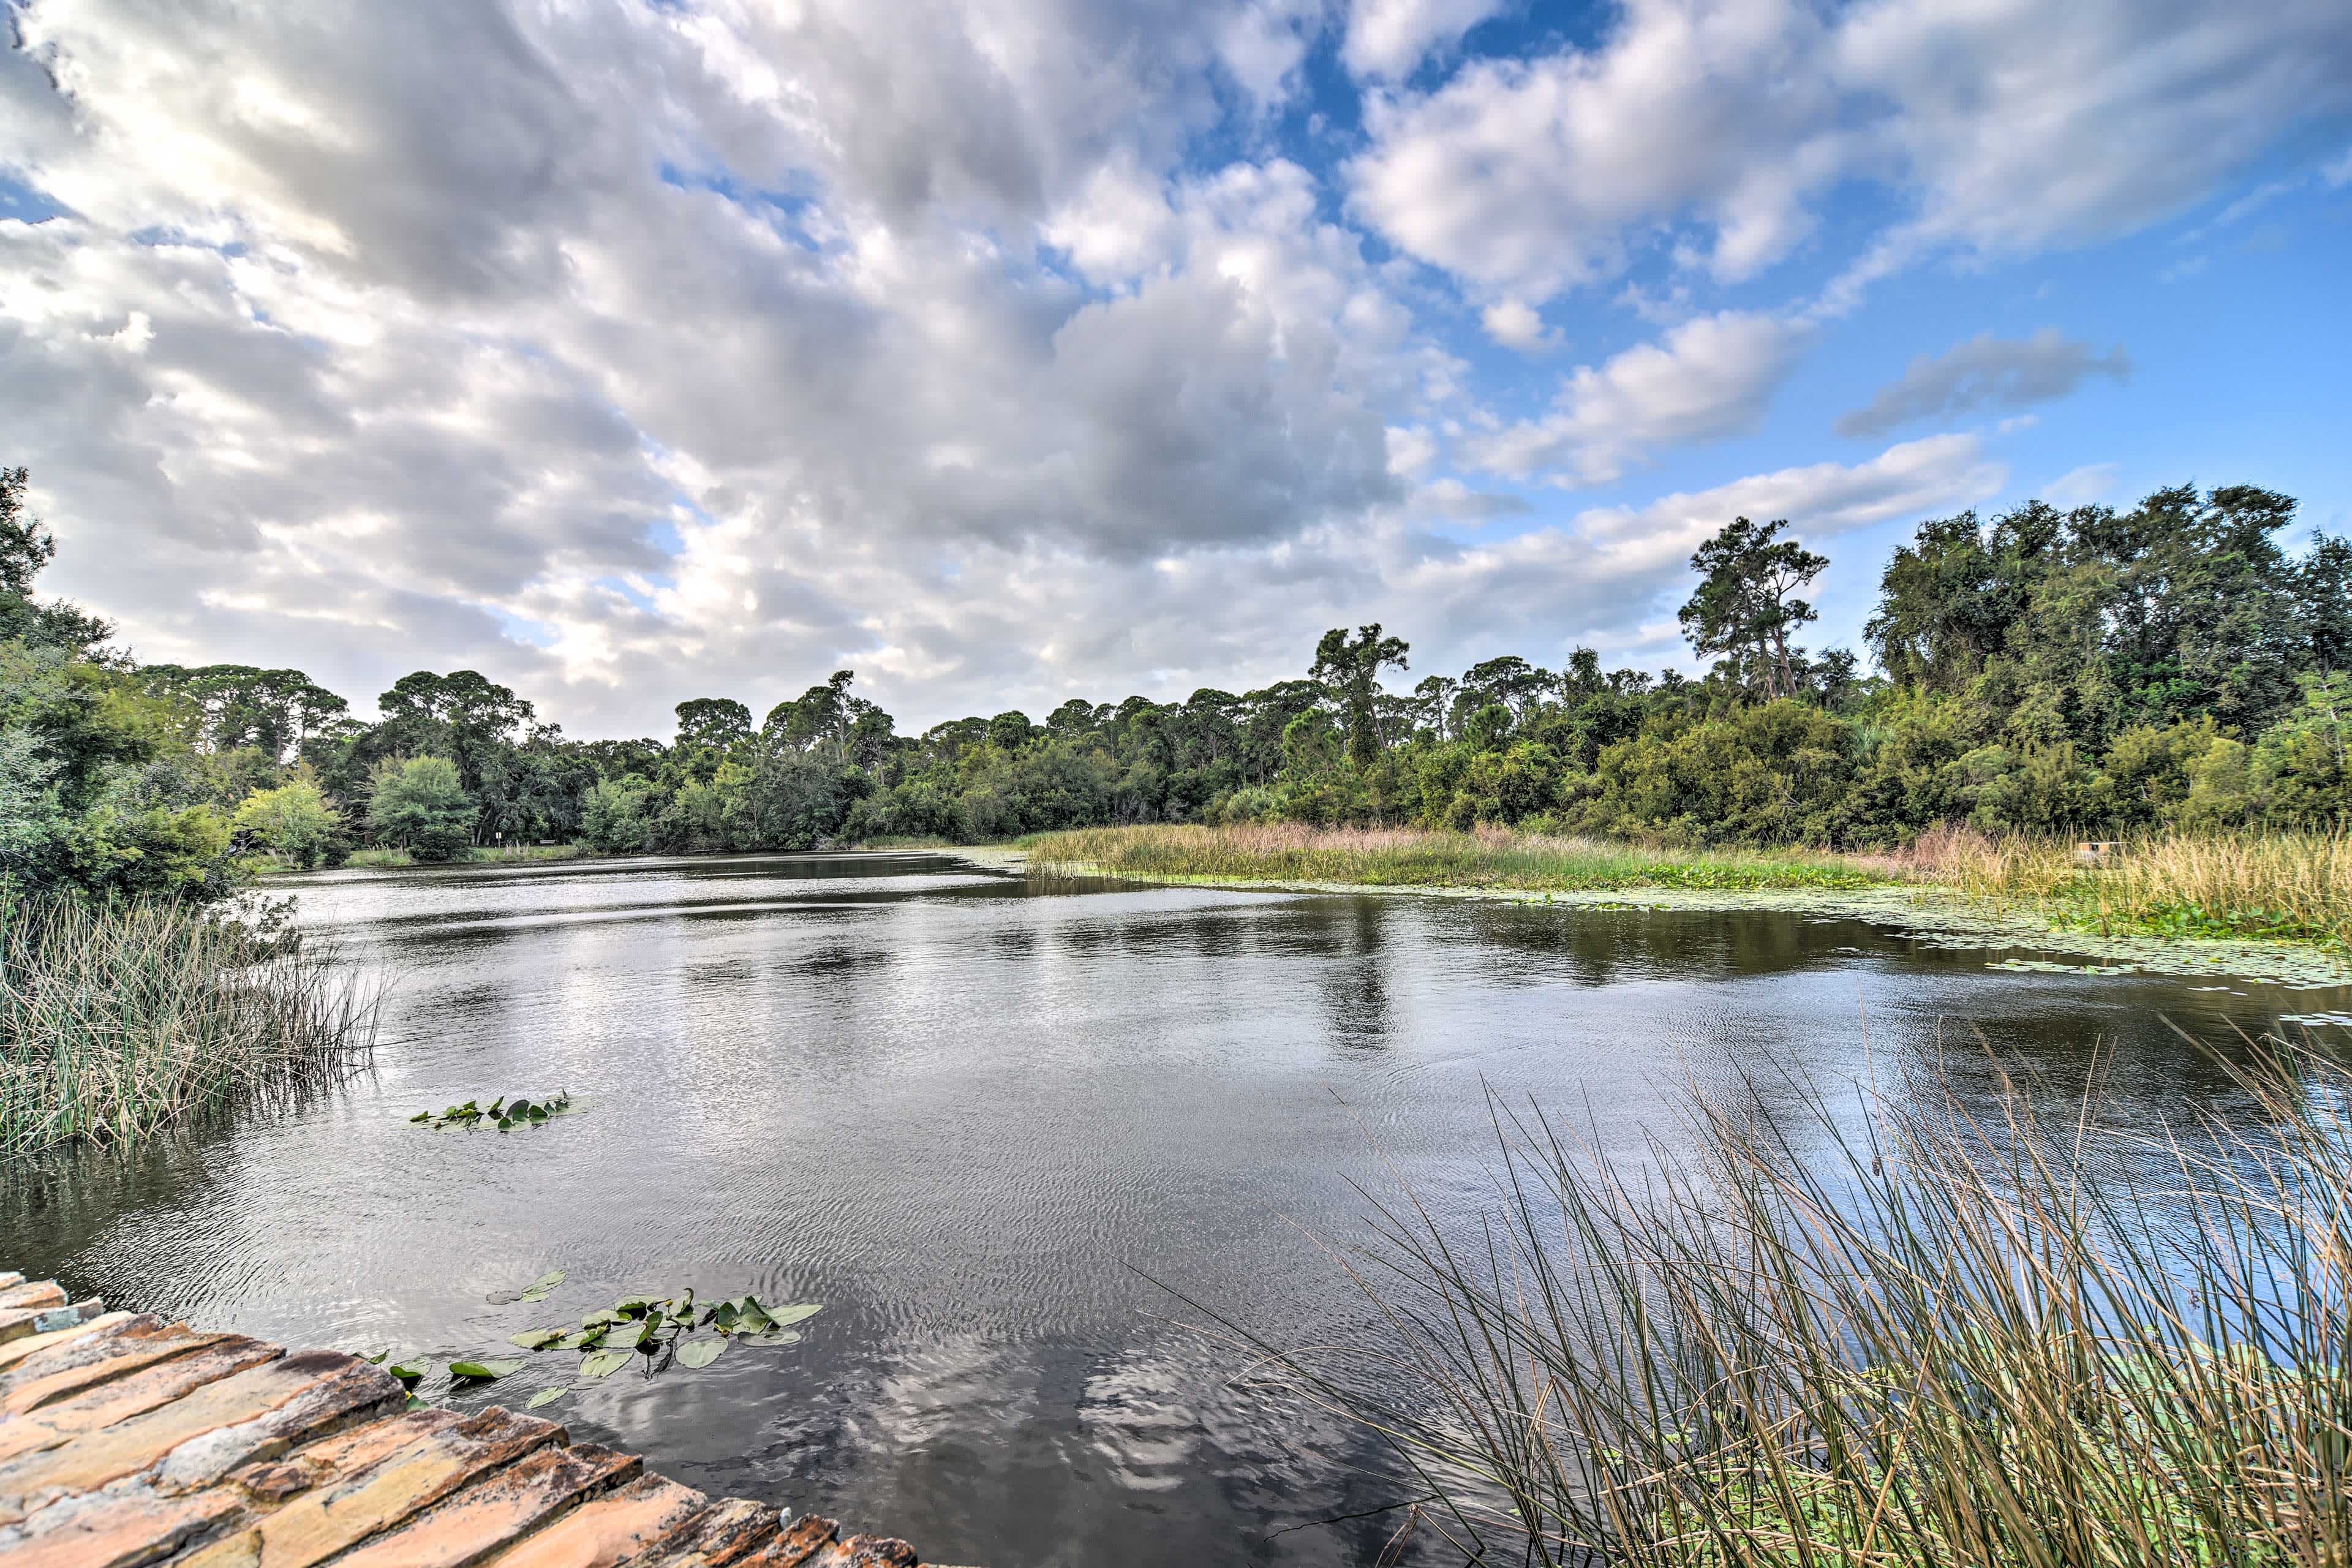 View of a pond in Seminole, FL with green trees surrounding it, and blue skies overhead